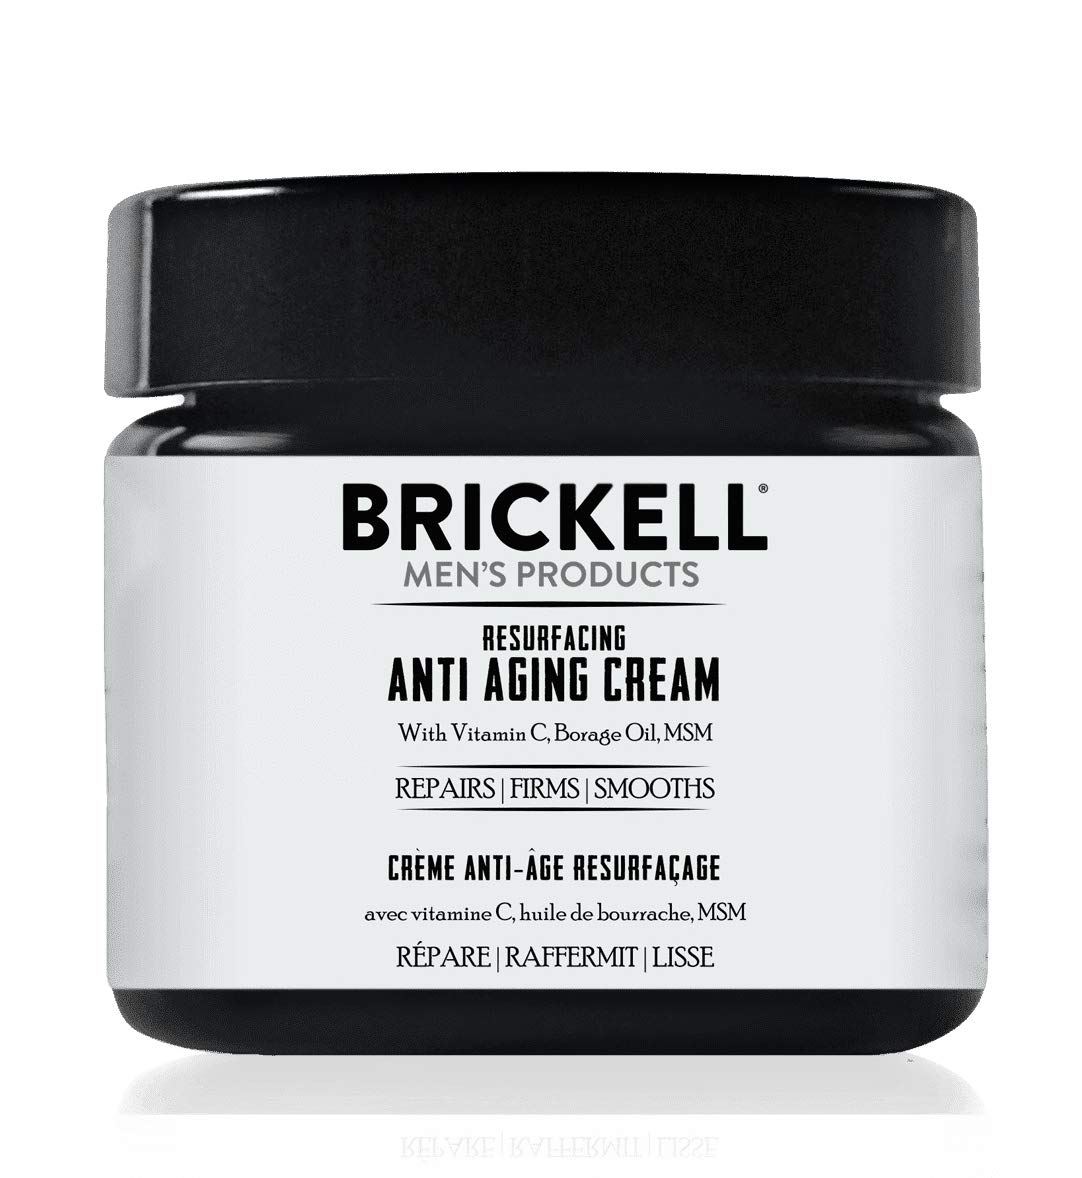 Brickell Men's Products Resurfacing Anti-Aging Cream - 2 Ounce-0